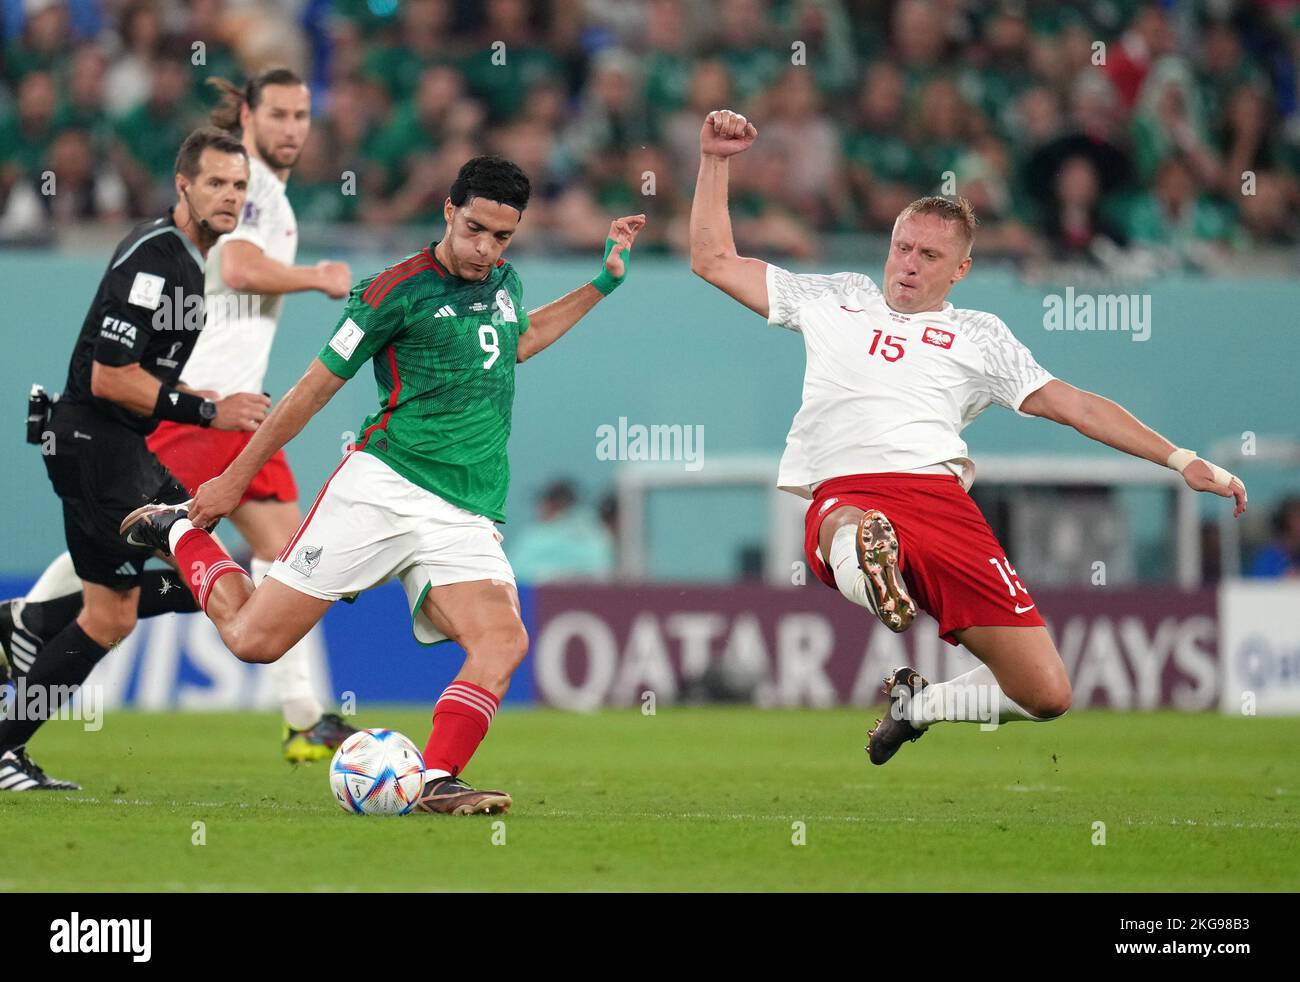 Mexico's Raul Jimenez and Poland's Kamil Glik battle for the ball during the FIFA World Cup Group C match at Stadium 974, Rass Abou Aboud. Picture date: Tuesday November 22, 2022. Stock Photo